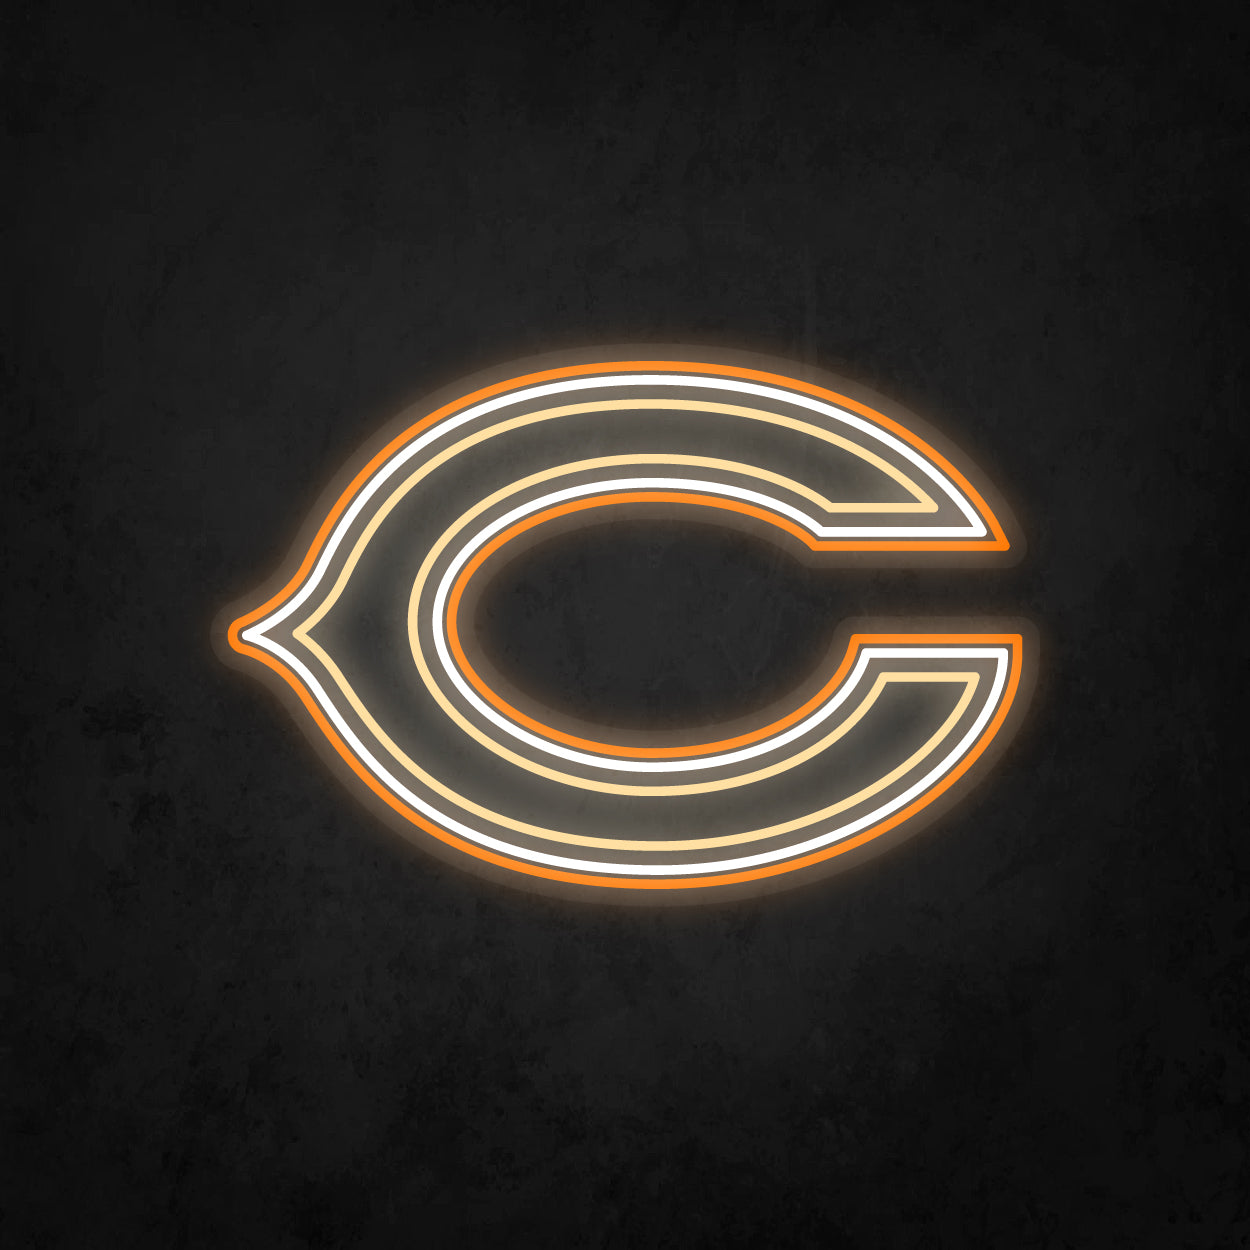 LED Neon Sign - Chicago Bears Large